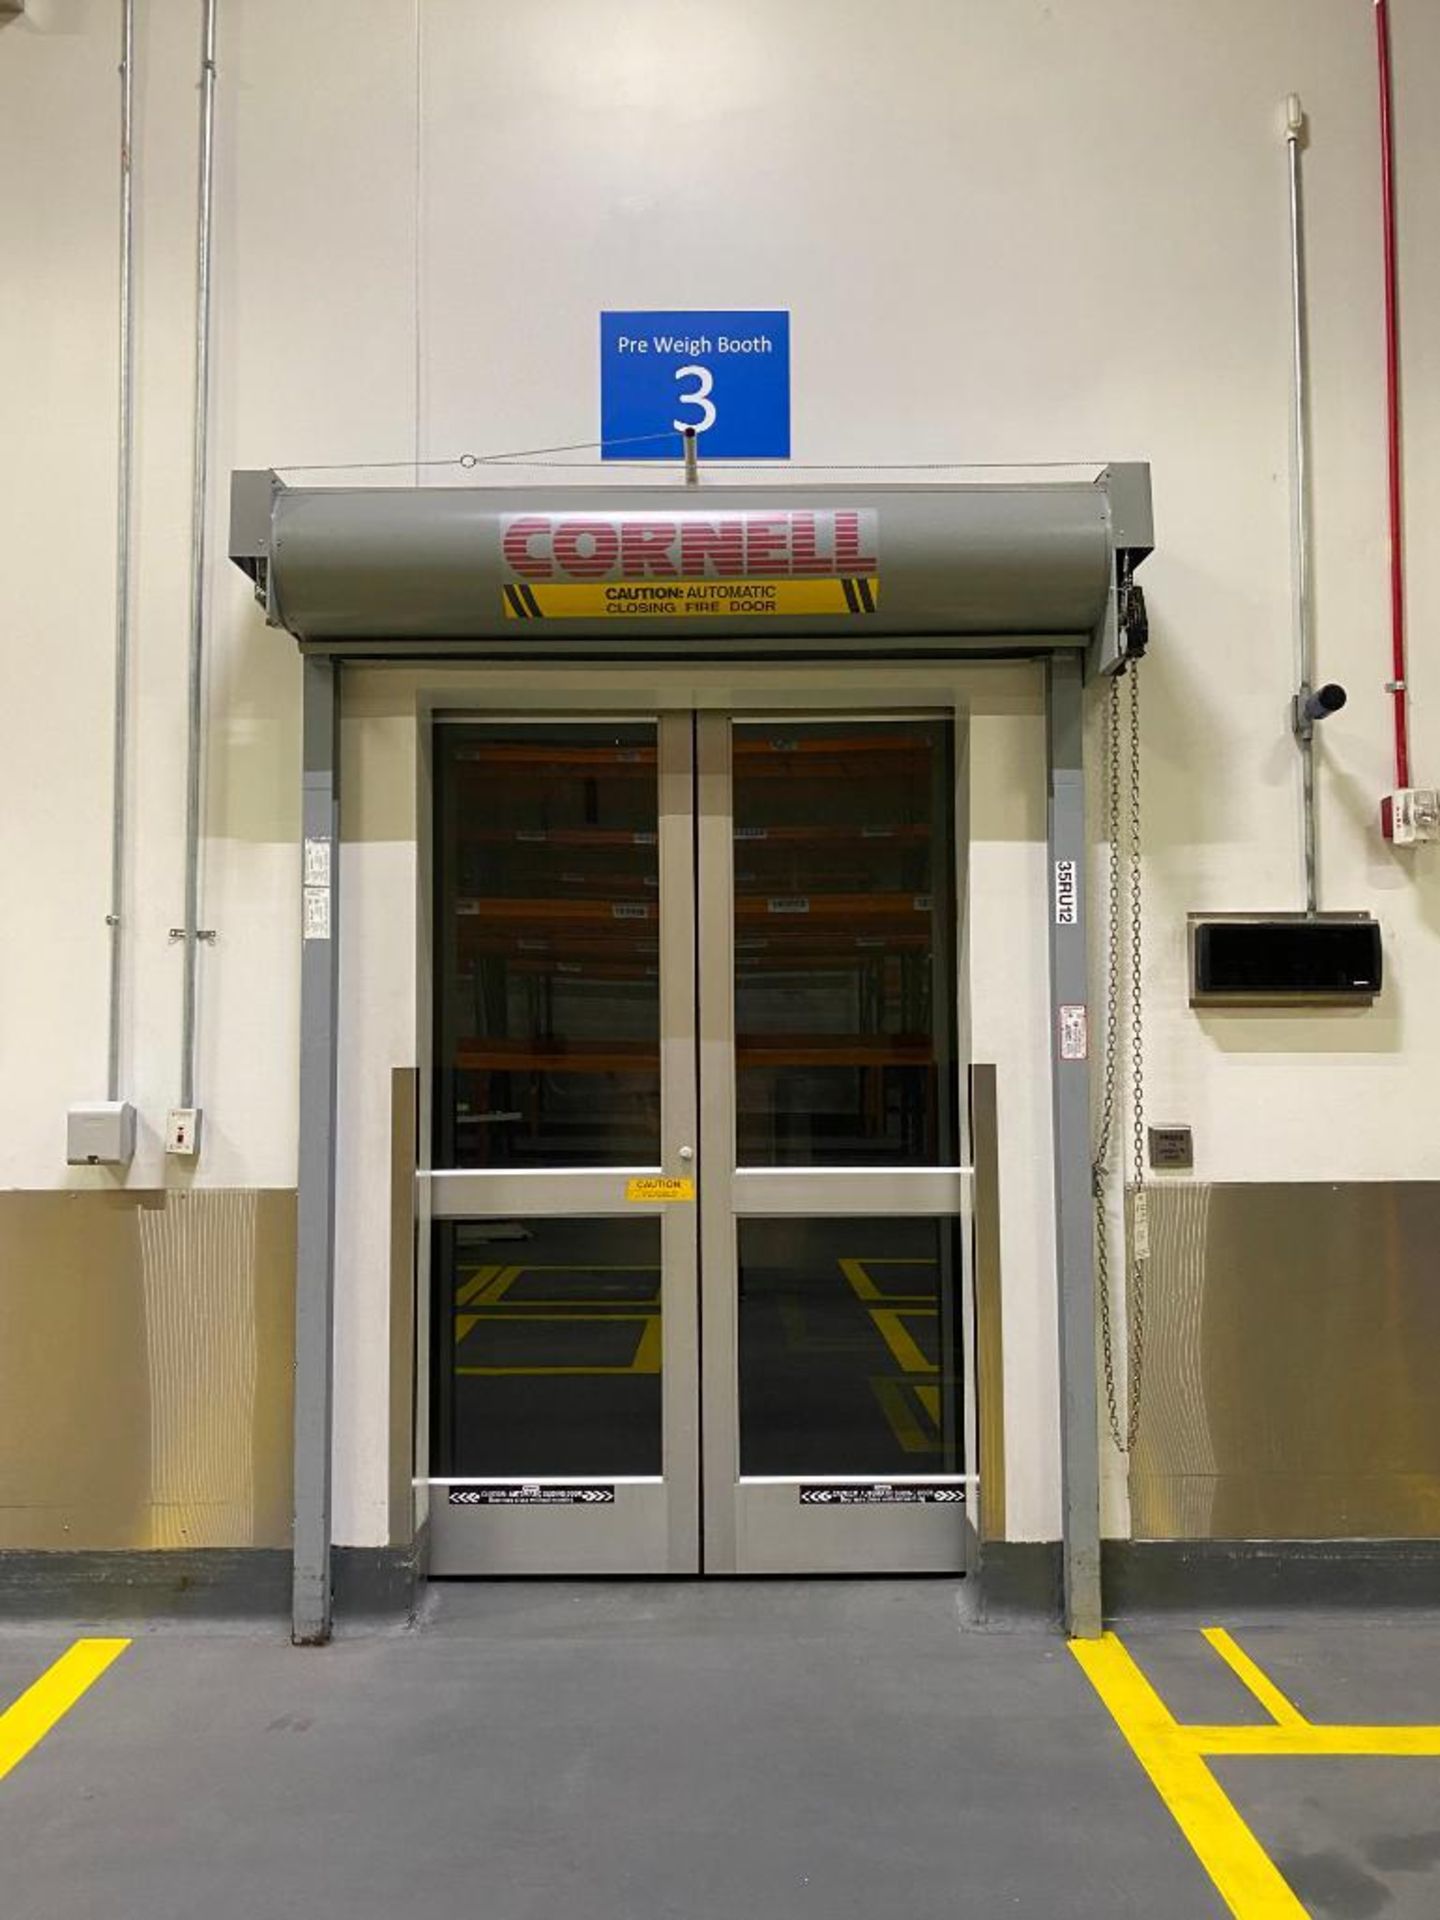 CORNELL FIRE DOORS; MANUALLY OPERATED; 76" WIDE X 8' TALL